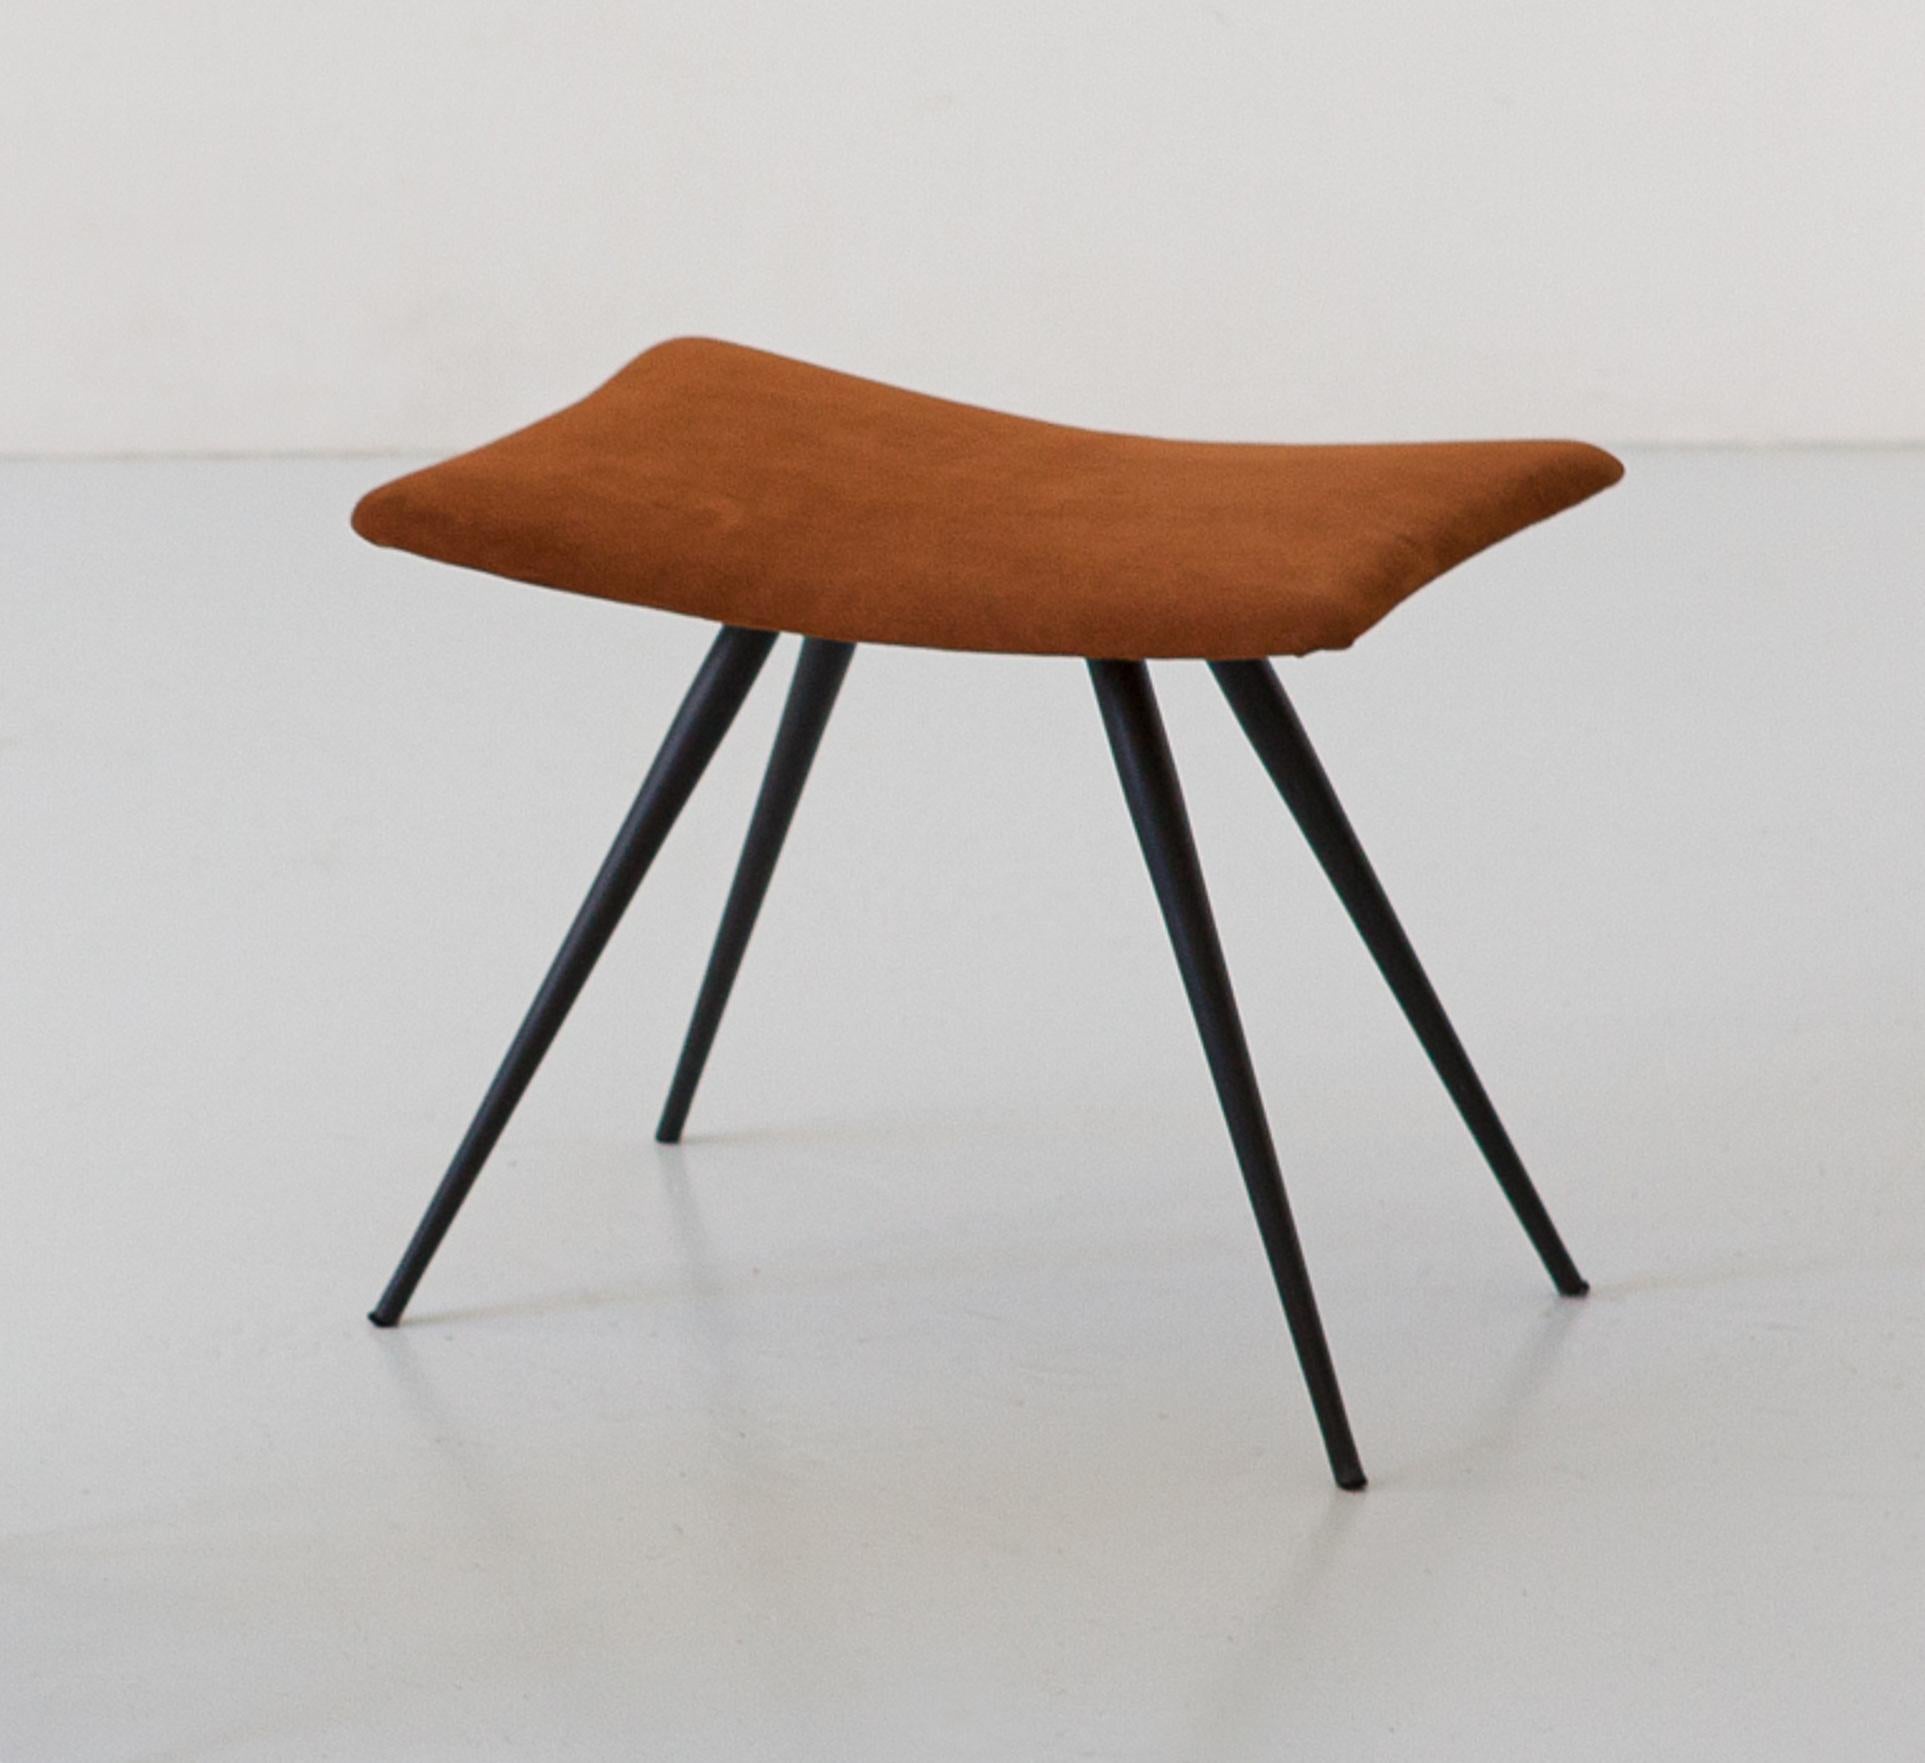 Mid-20th Century Italian Stool in Cognac Suede Leather and Black Steel Conical Legs, 1950s For Sale